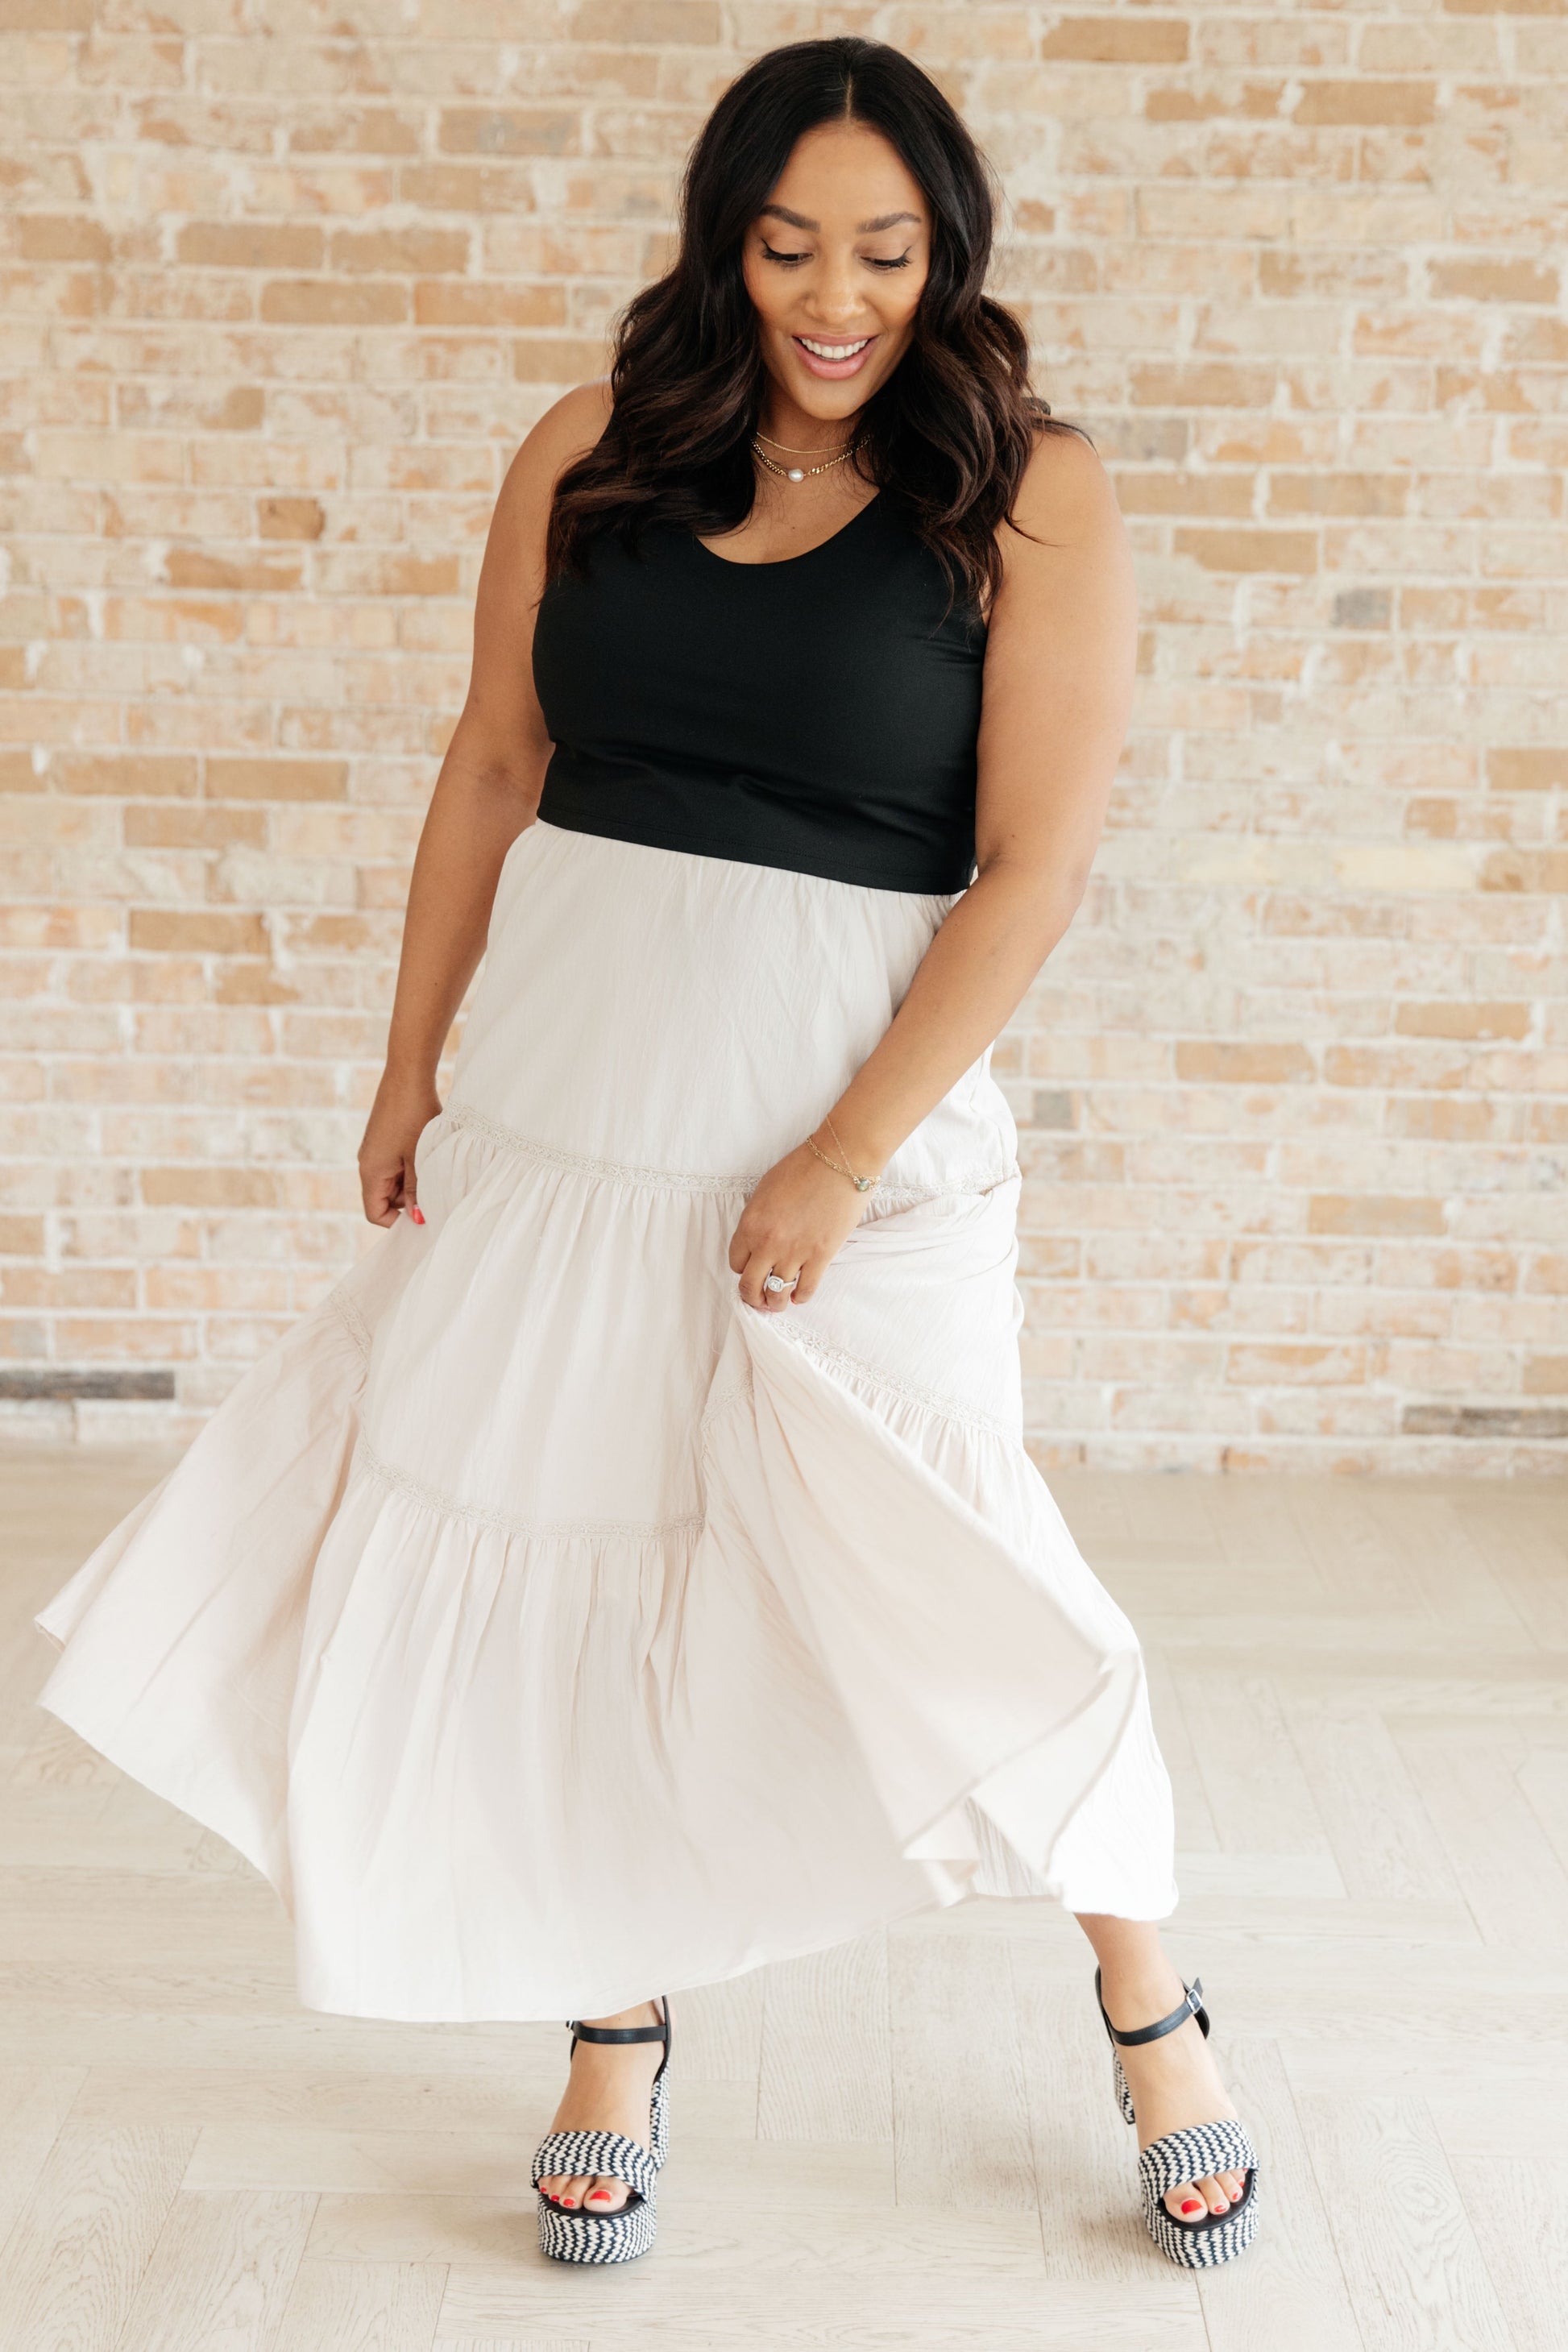 Let It Begin Tiered Maxi Skirt - Southern Divas Boutique